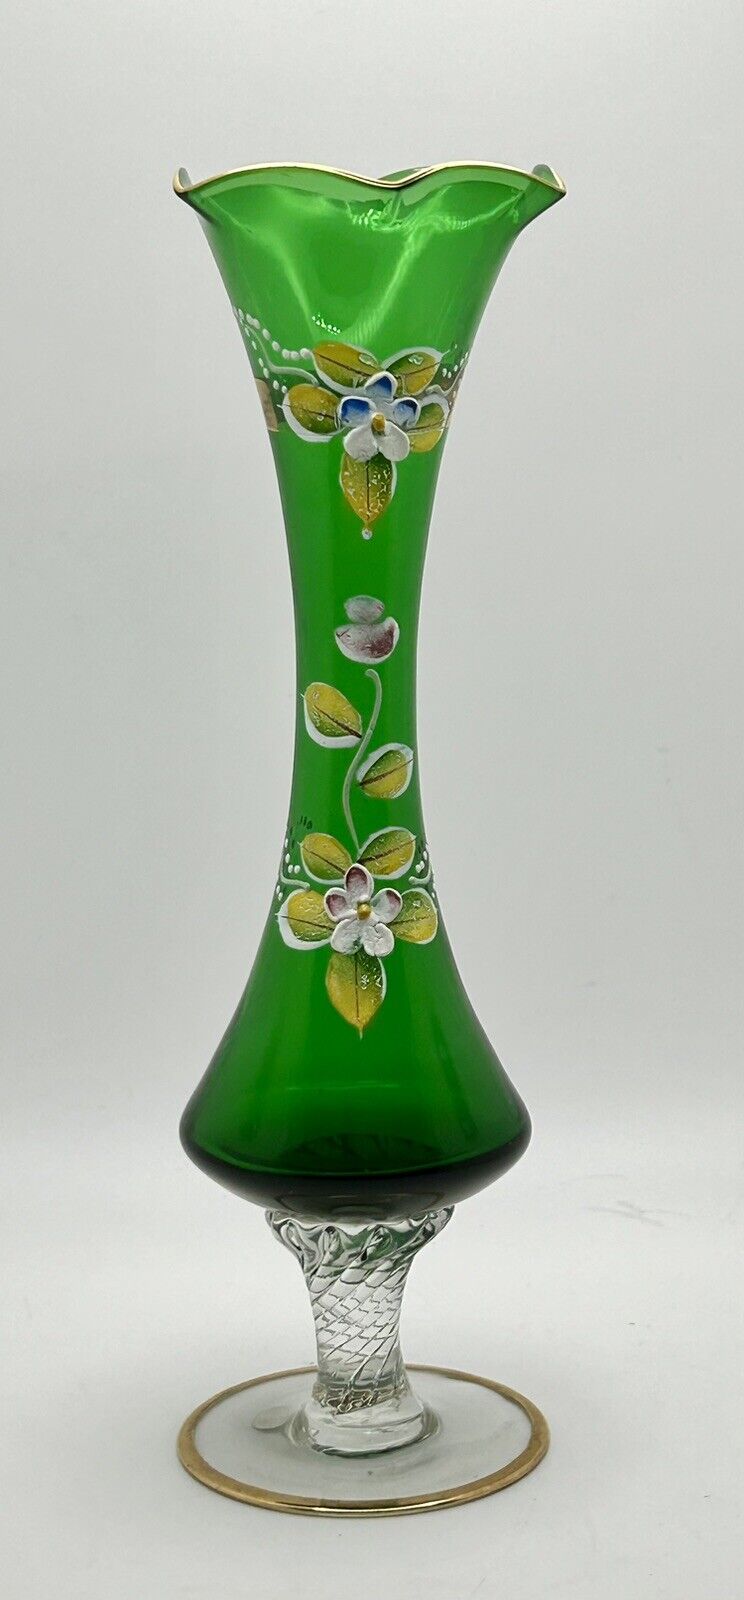 VINTAGE Green Glass Footed Bud Vase Gold Trim Hand Painted Flowers Japan 8”